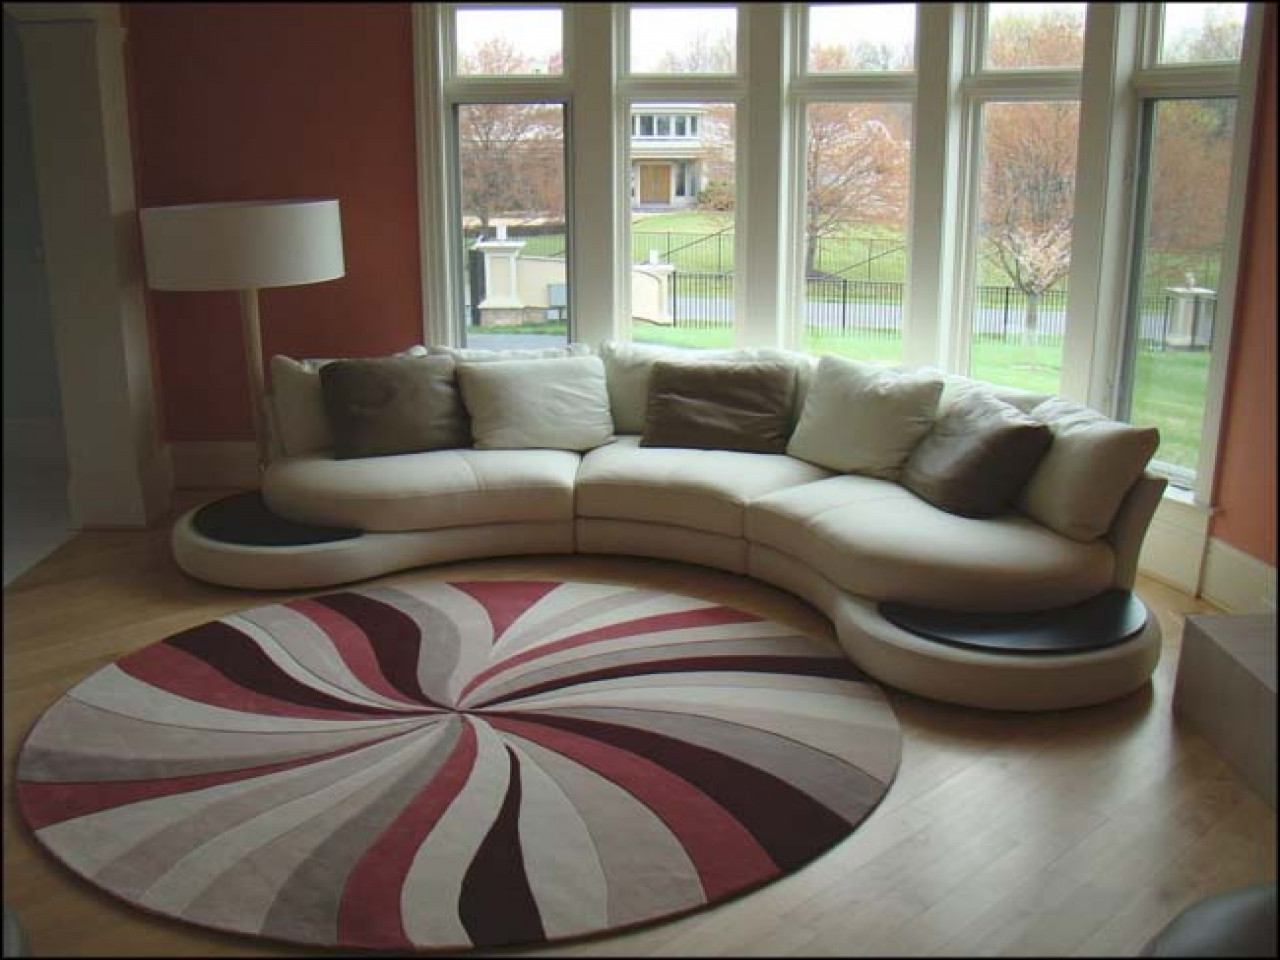 Living Room With Rugs
 Rugs for Cozy Living Room Area Rugs Ideas